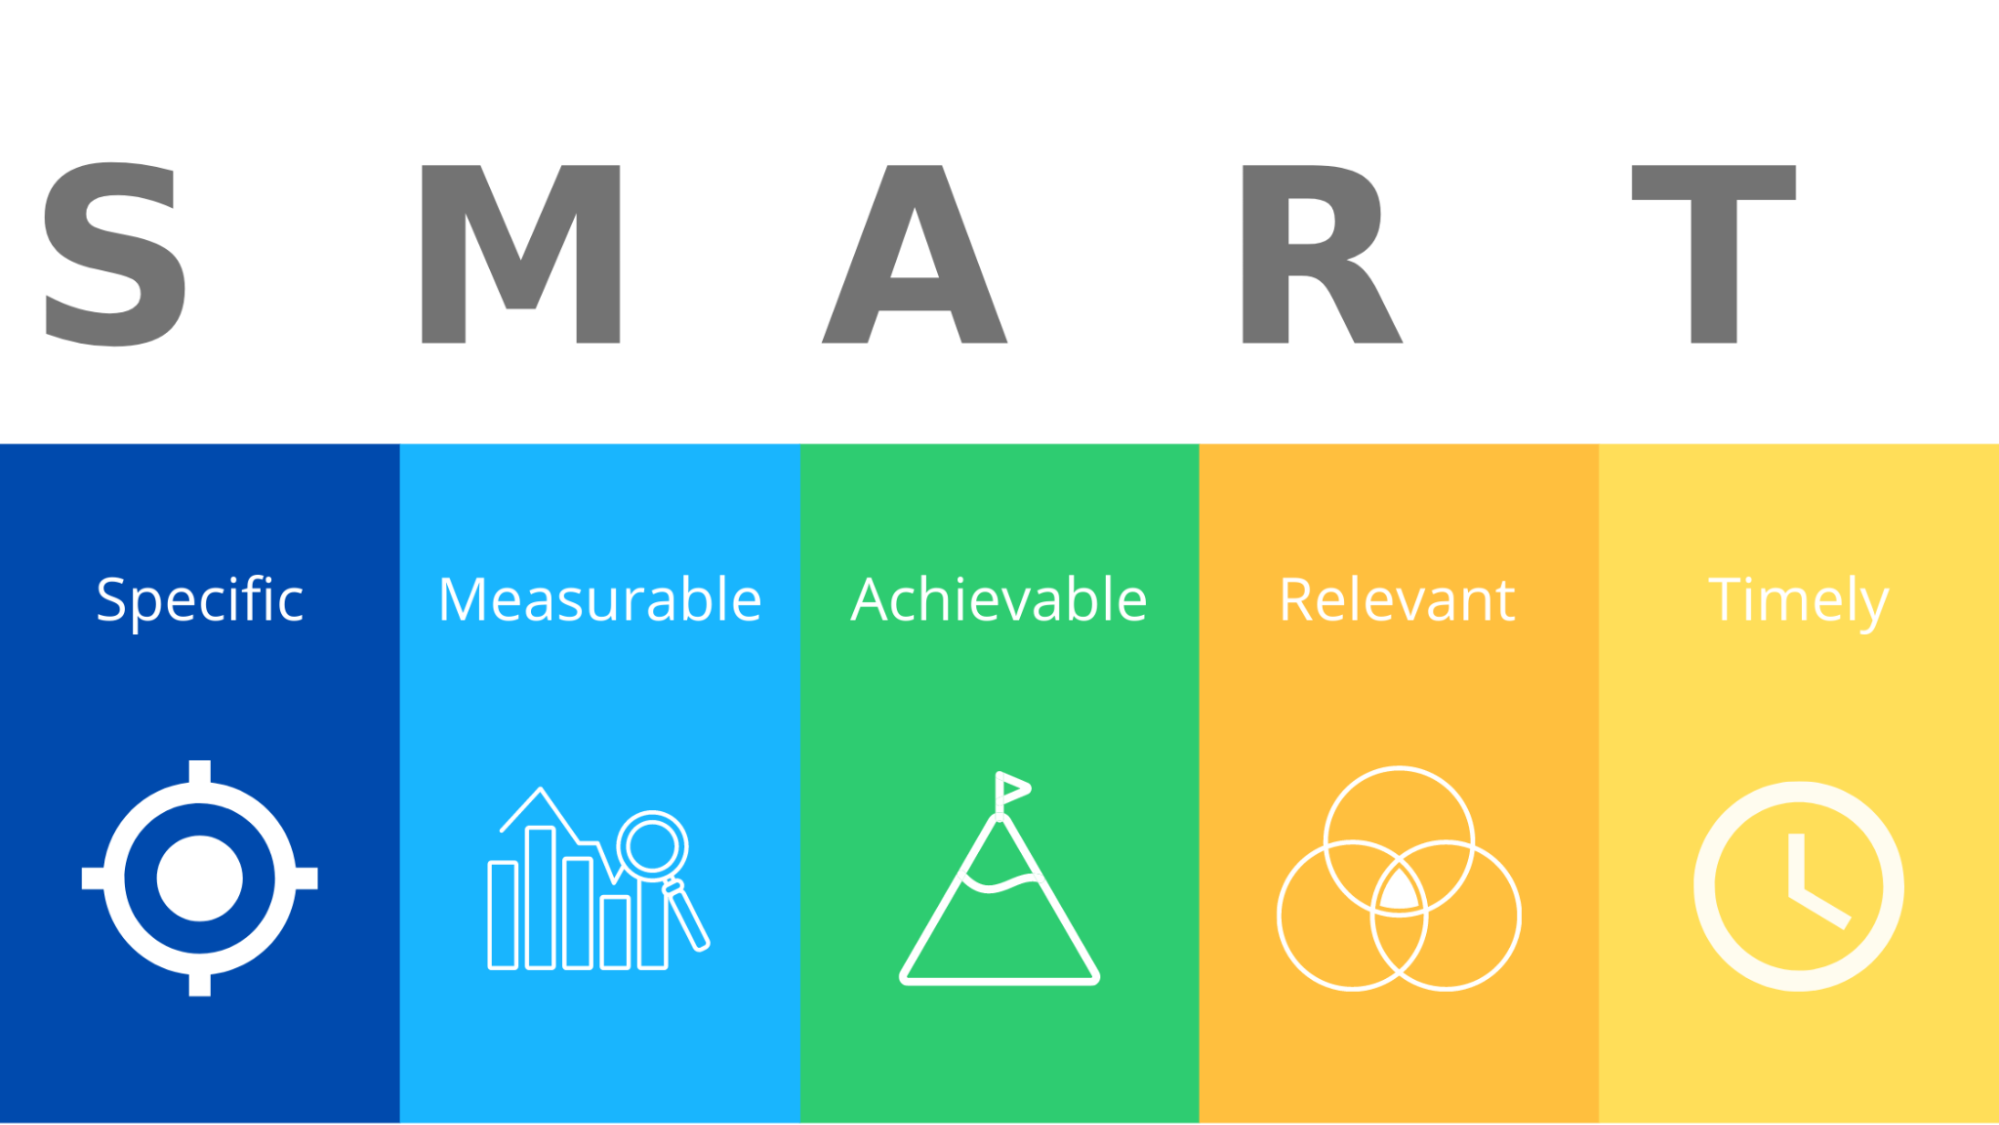 SMART Teacher Goals Examples. Why is It Important for Teachers to Set SMART Goals?